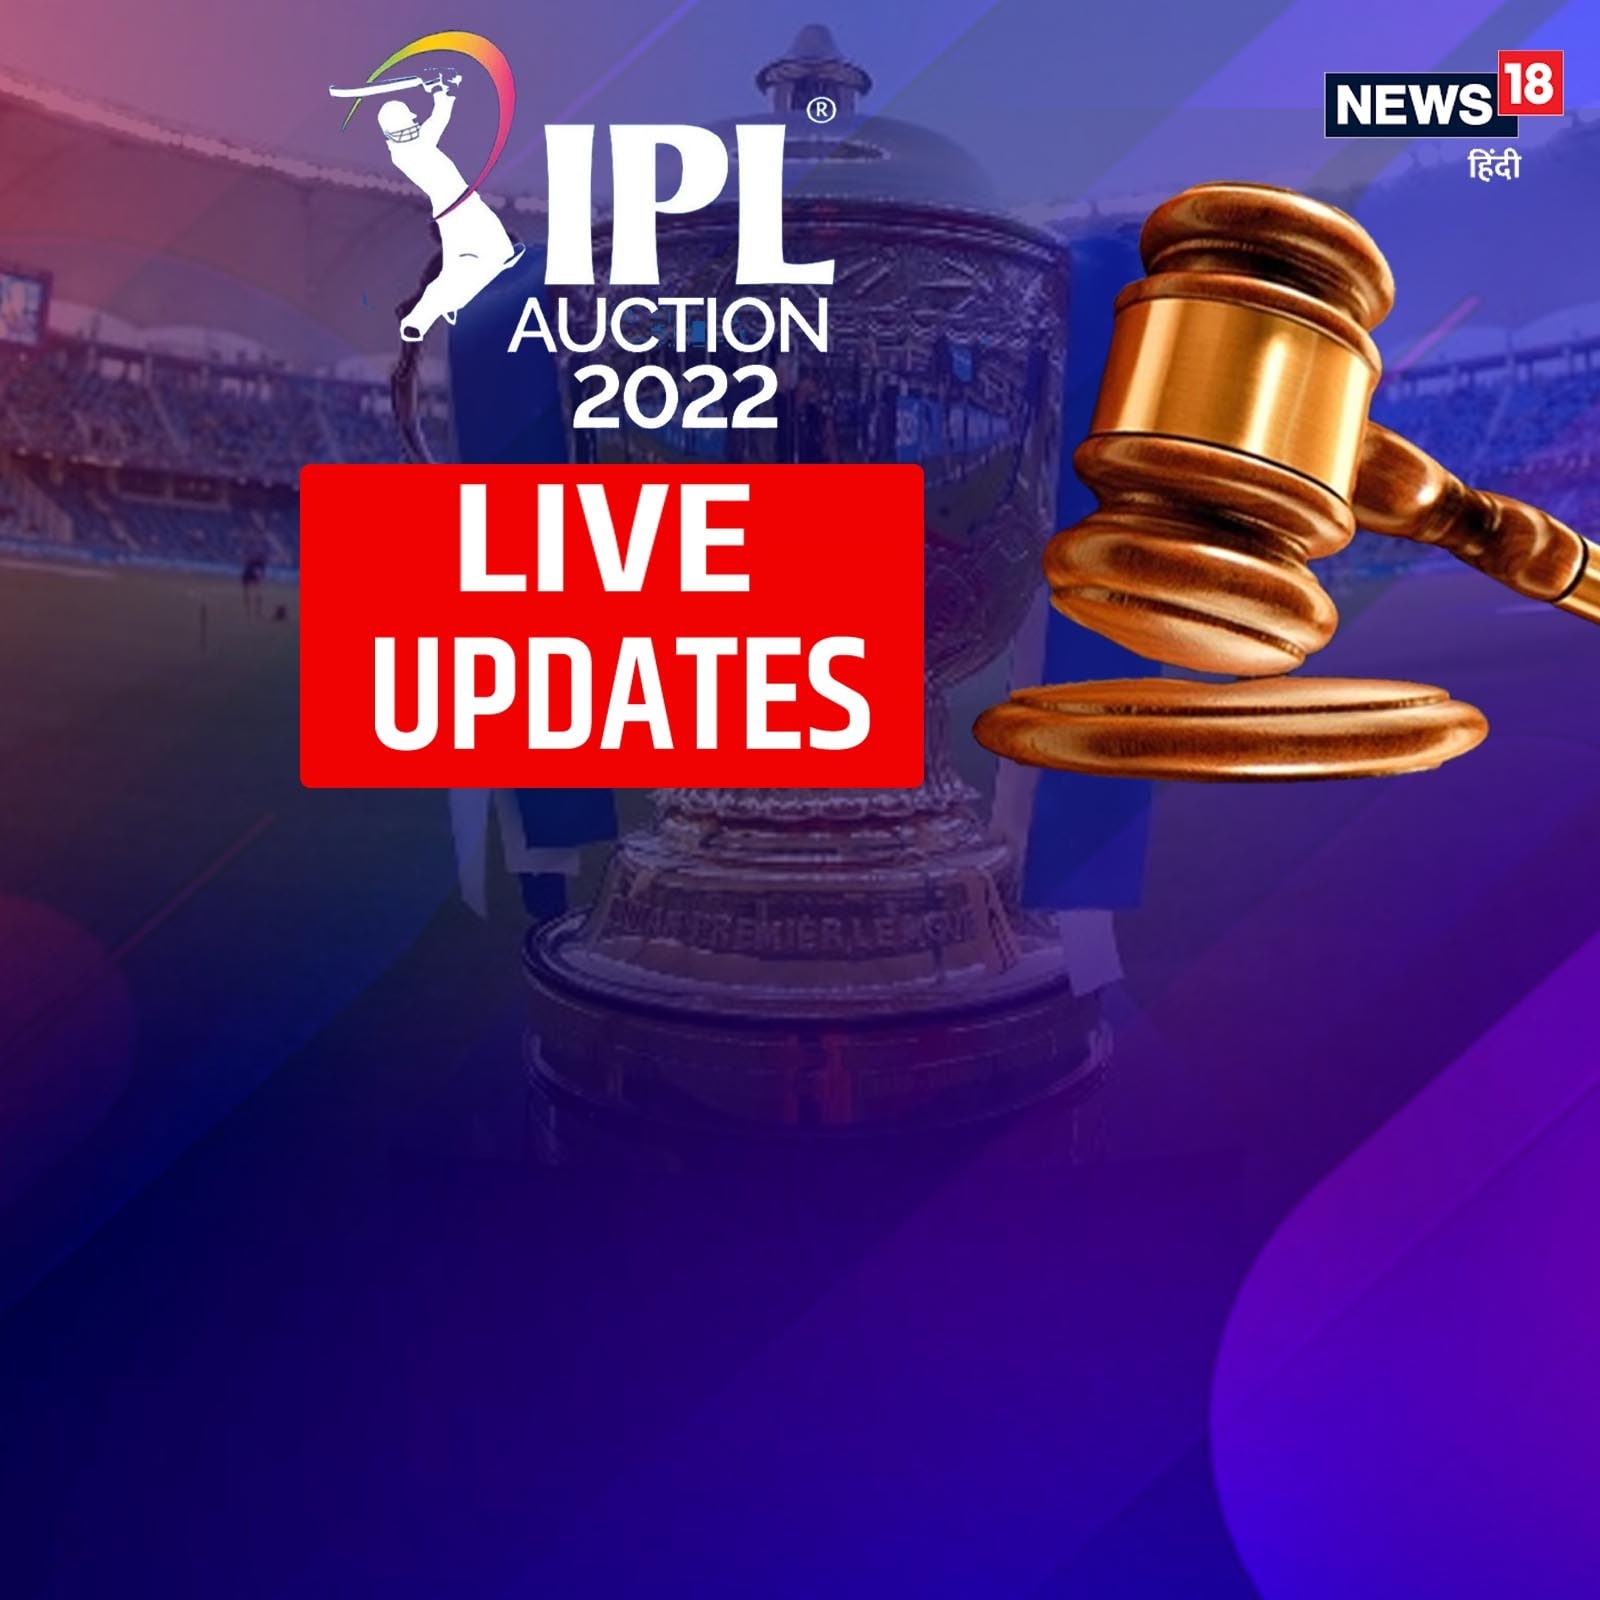 Requirements and limitations for teams at upcoming IPL Player Auction